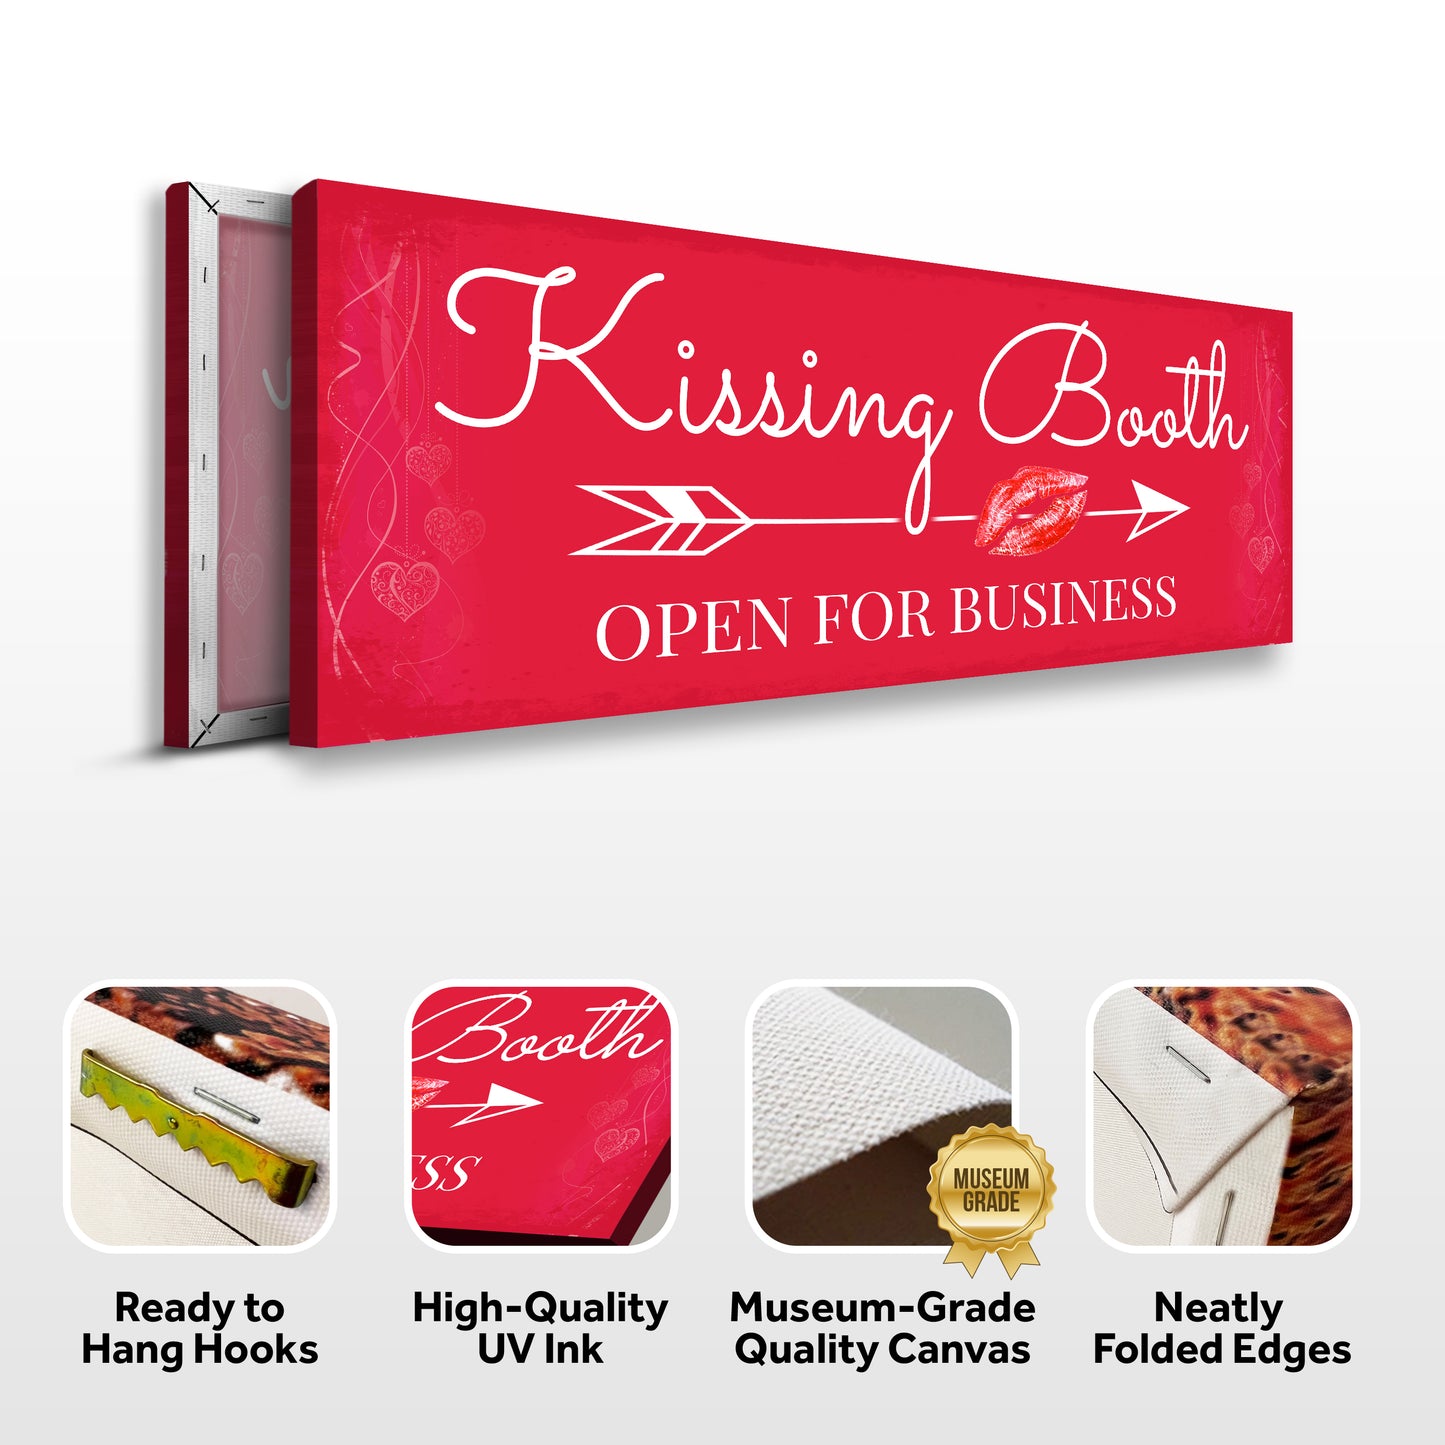 Kissing Booth "Open For Business" Sign